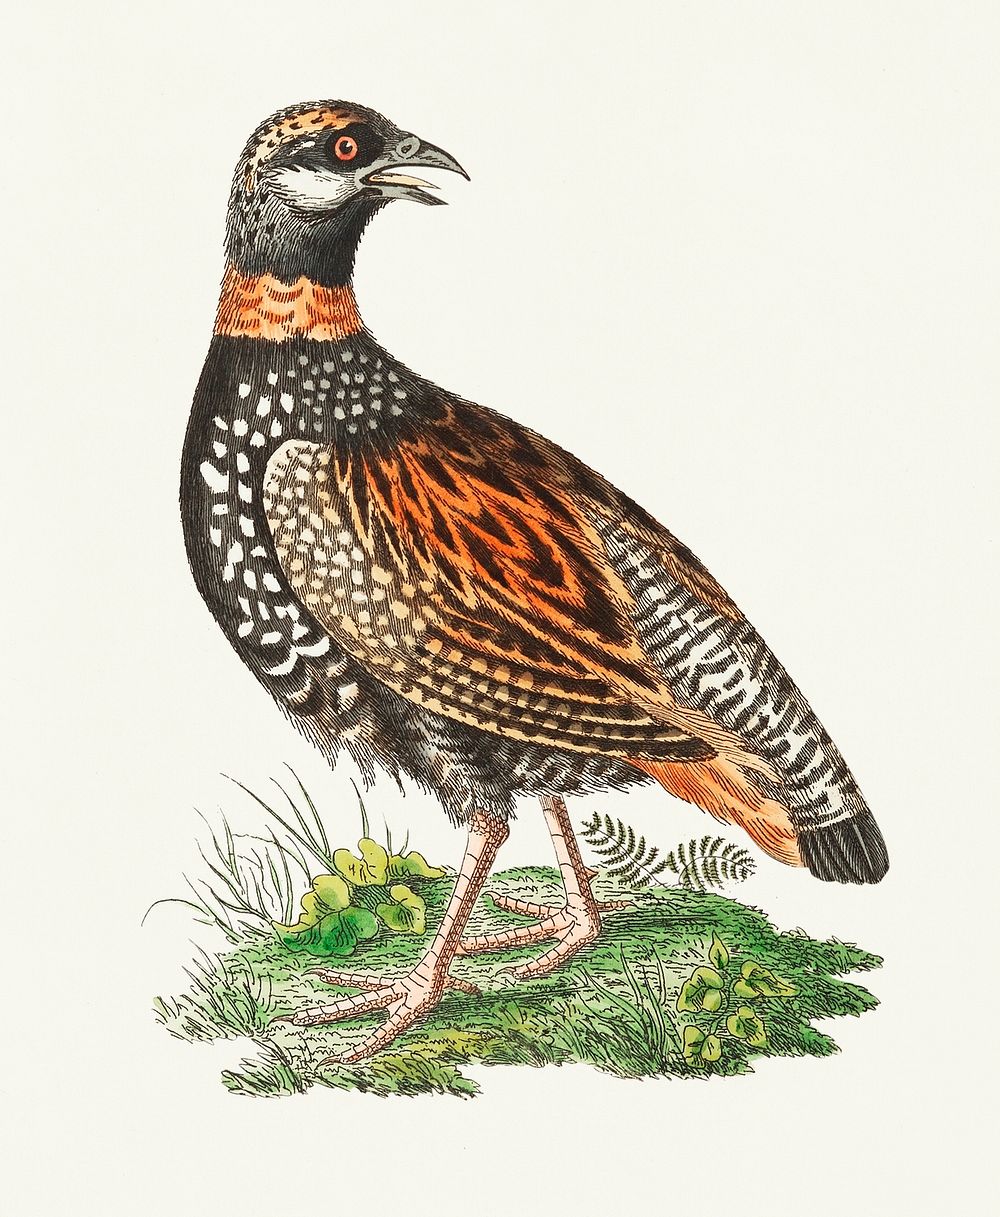 Francolin Partridge illustration from The Naturalist's Miscellany (1789-1813) by George Shaw (1751-1813)